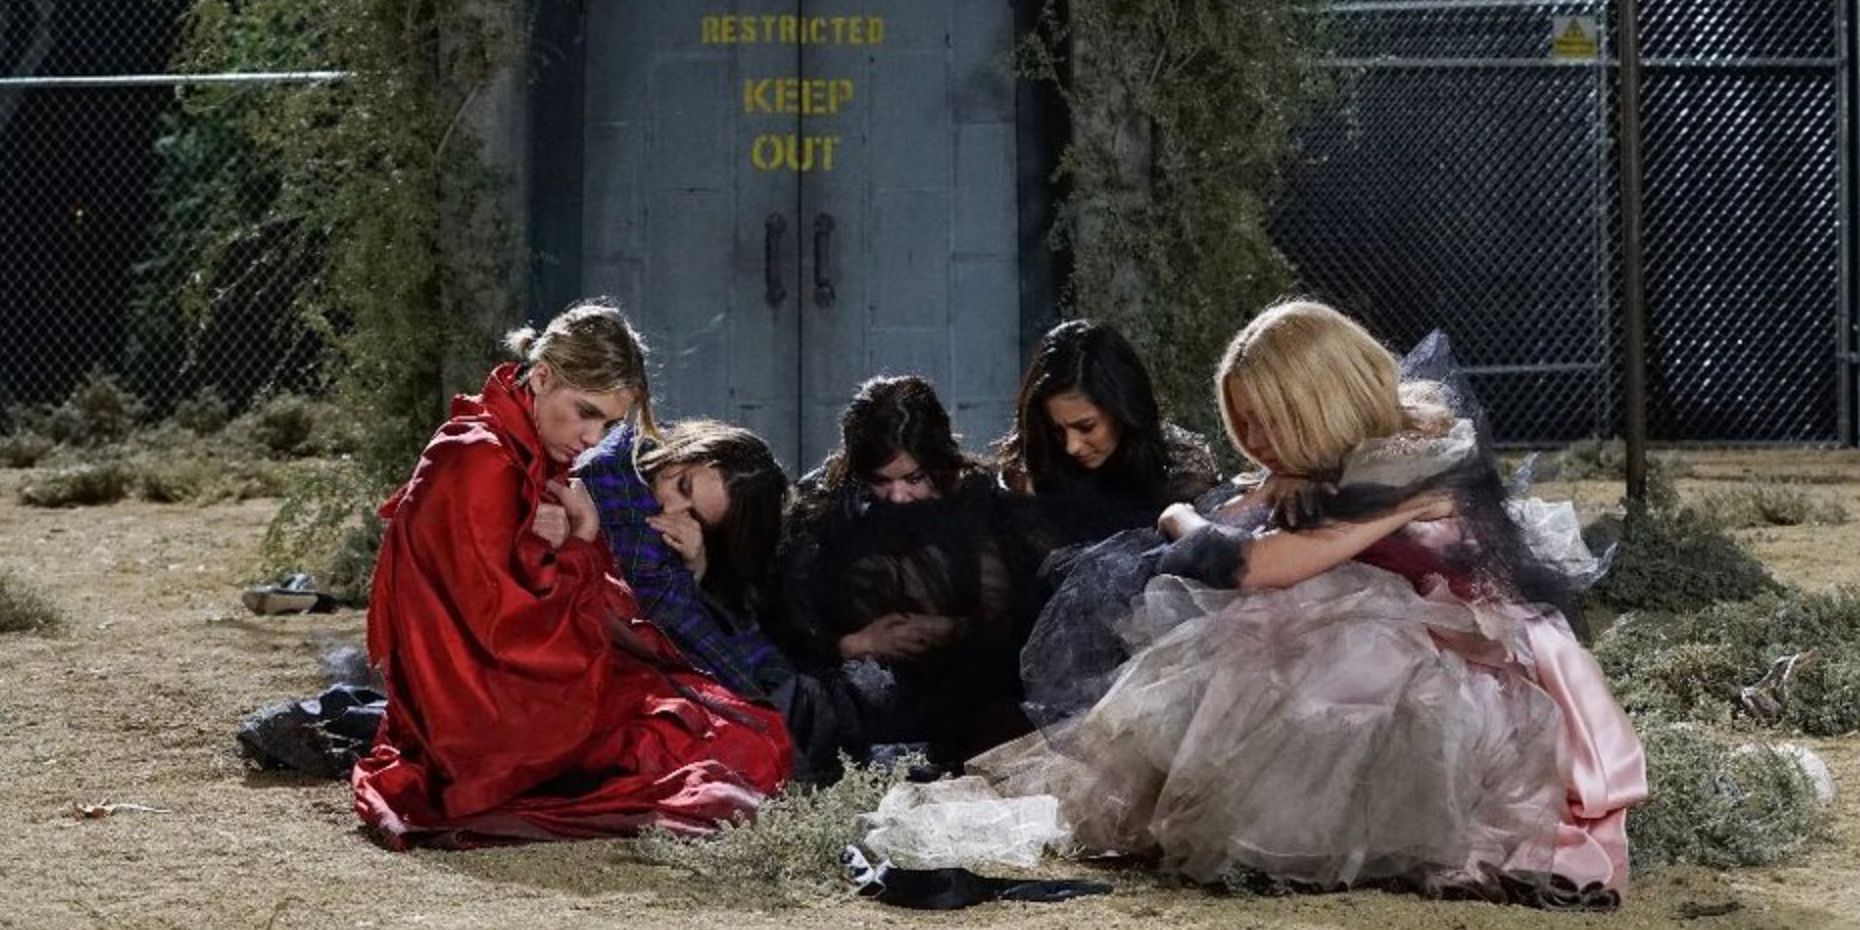 The Liars and Mona outside of the dollhouse huddled together in disheveled dresses in Pretty Little Liars